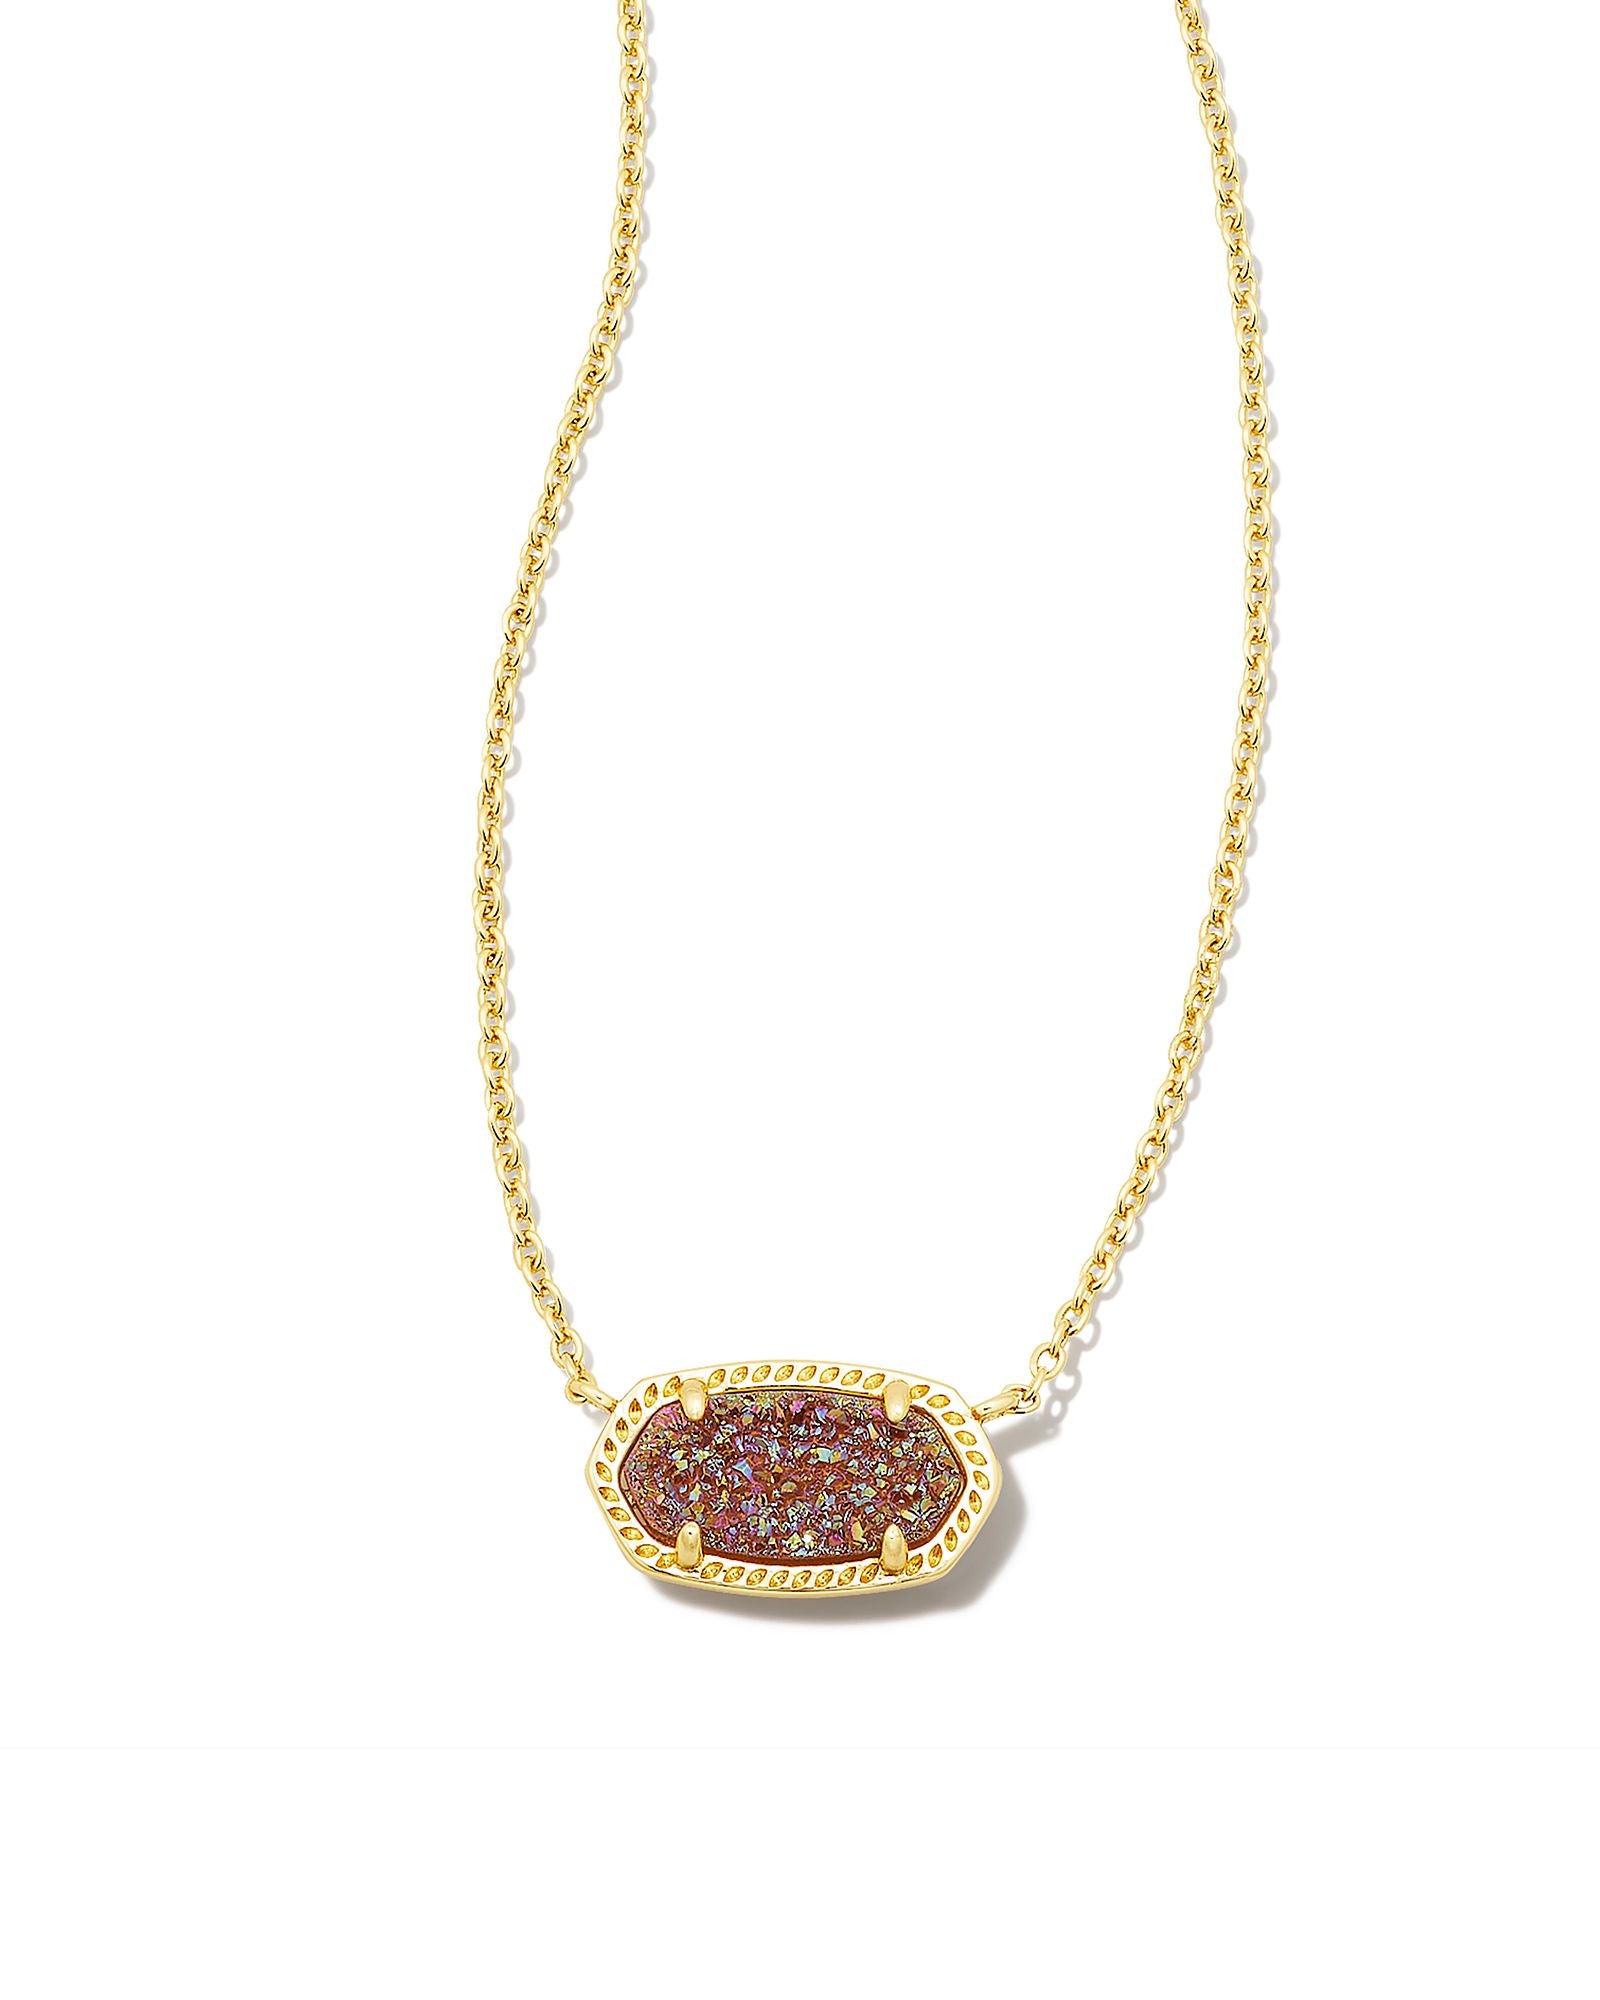 Elisa Necklace in Gold Spice Drusy